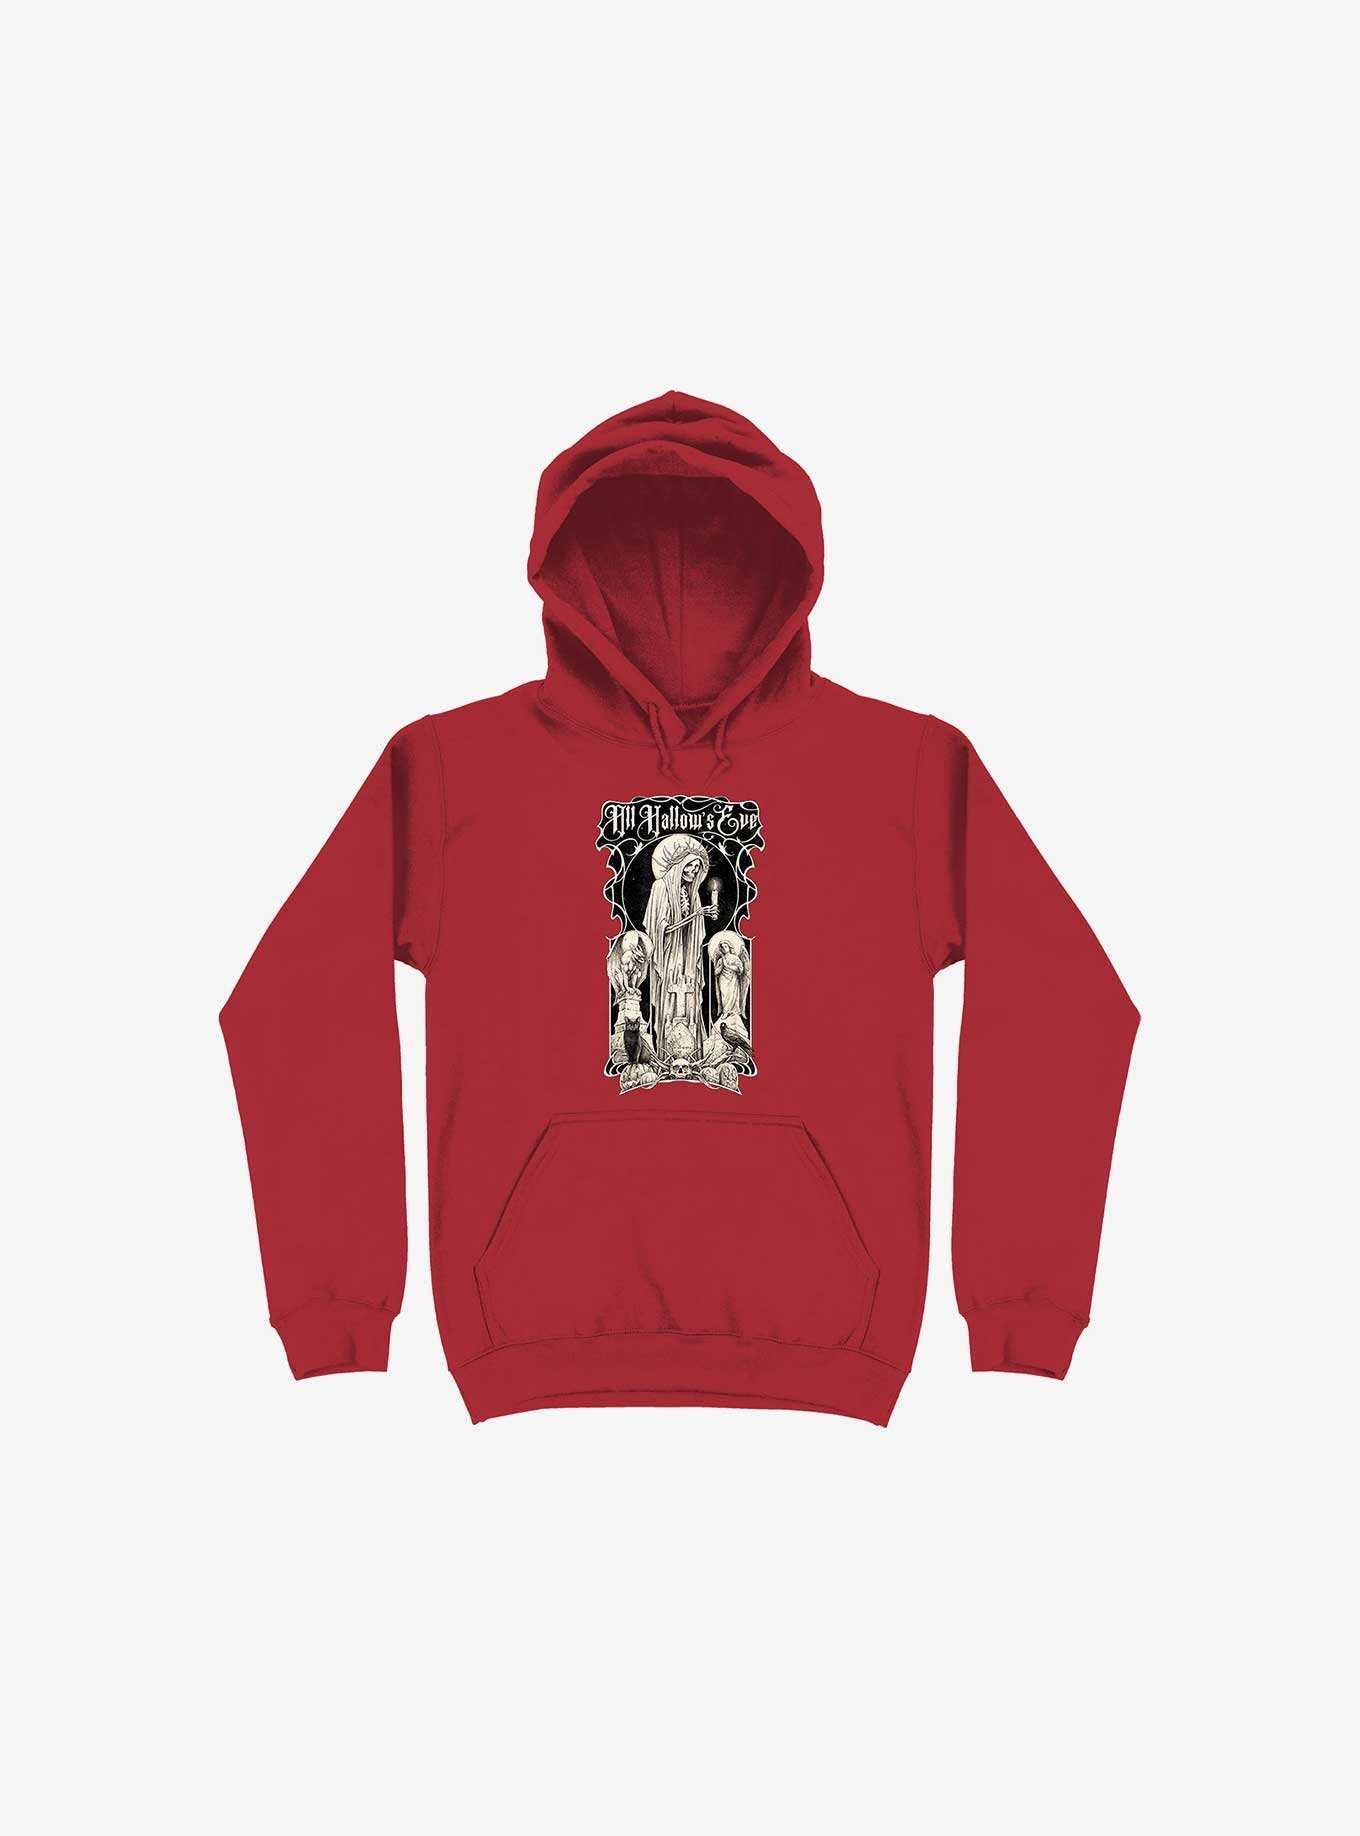 All Hallow's Eve Red Hoodie, , hi-res